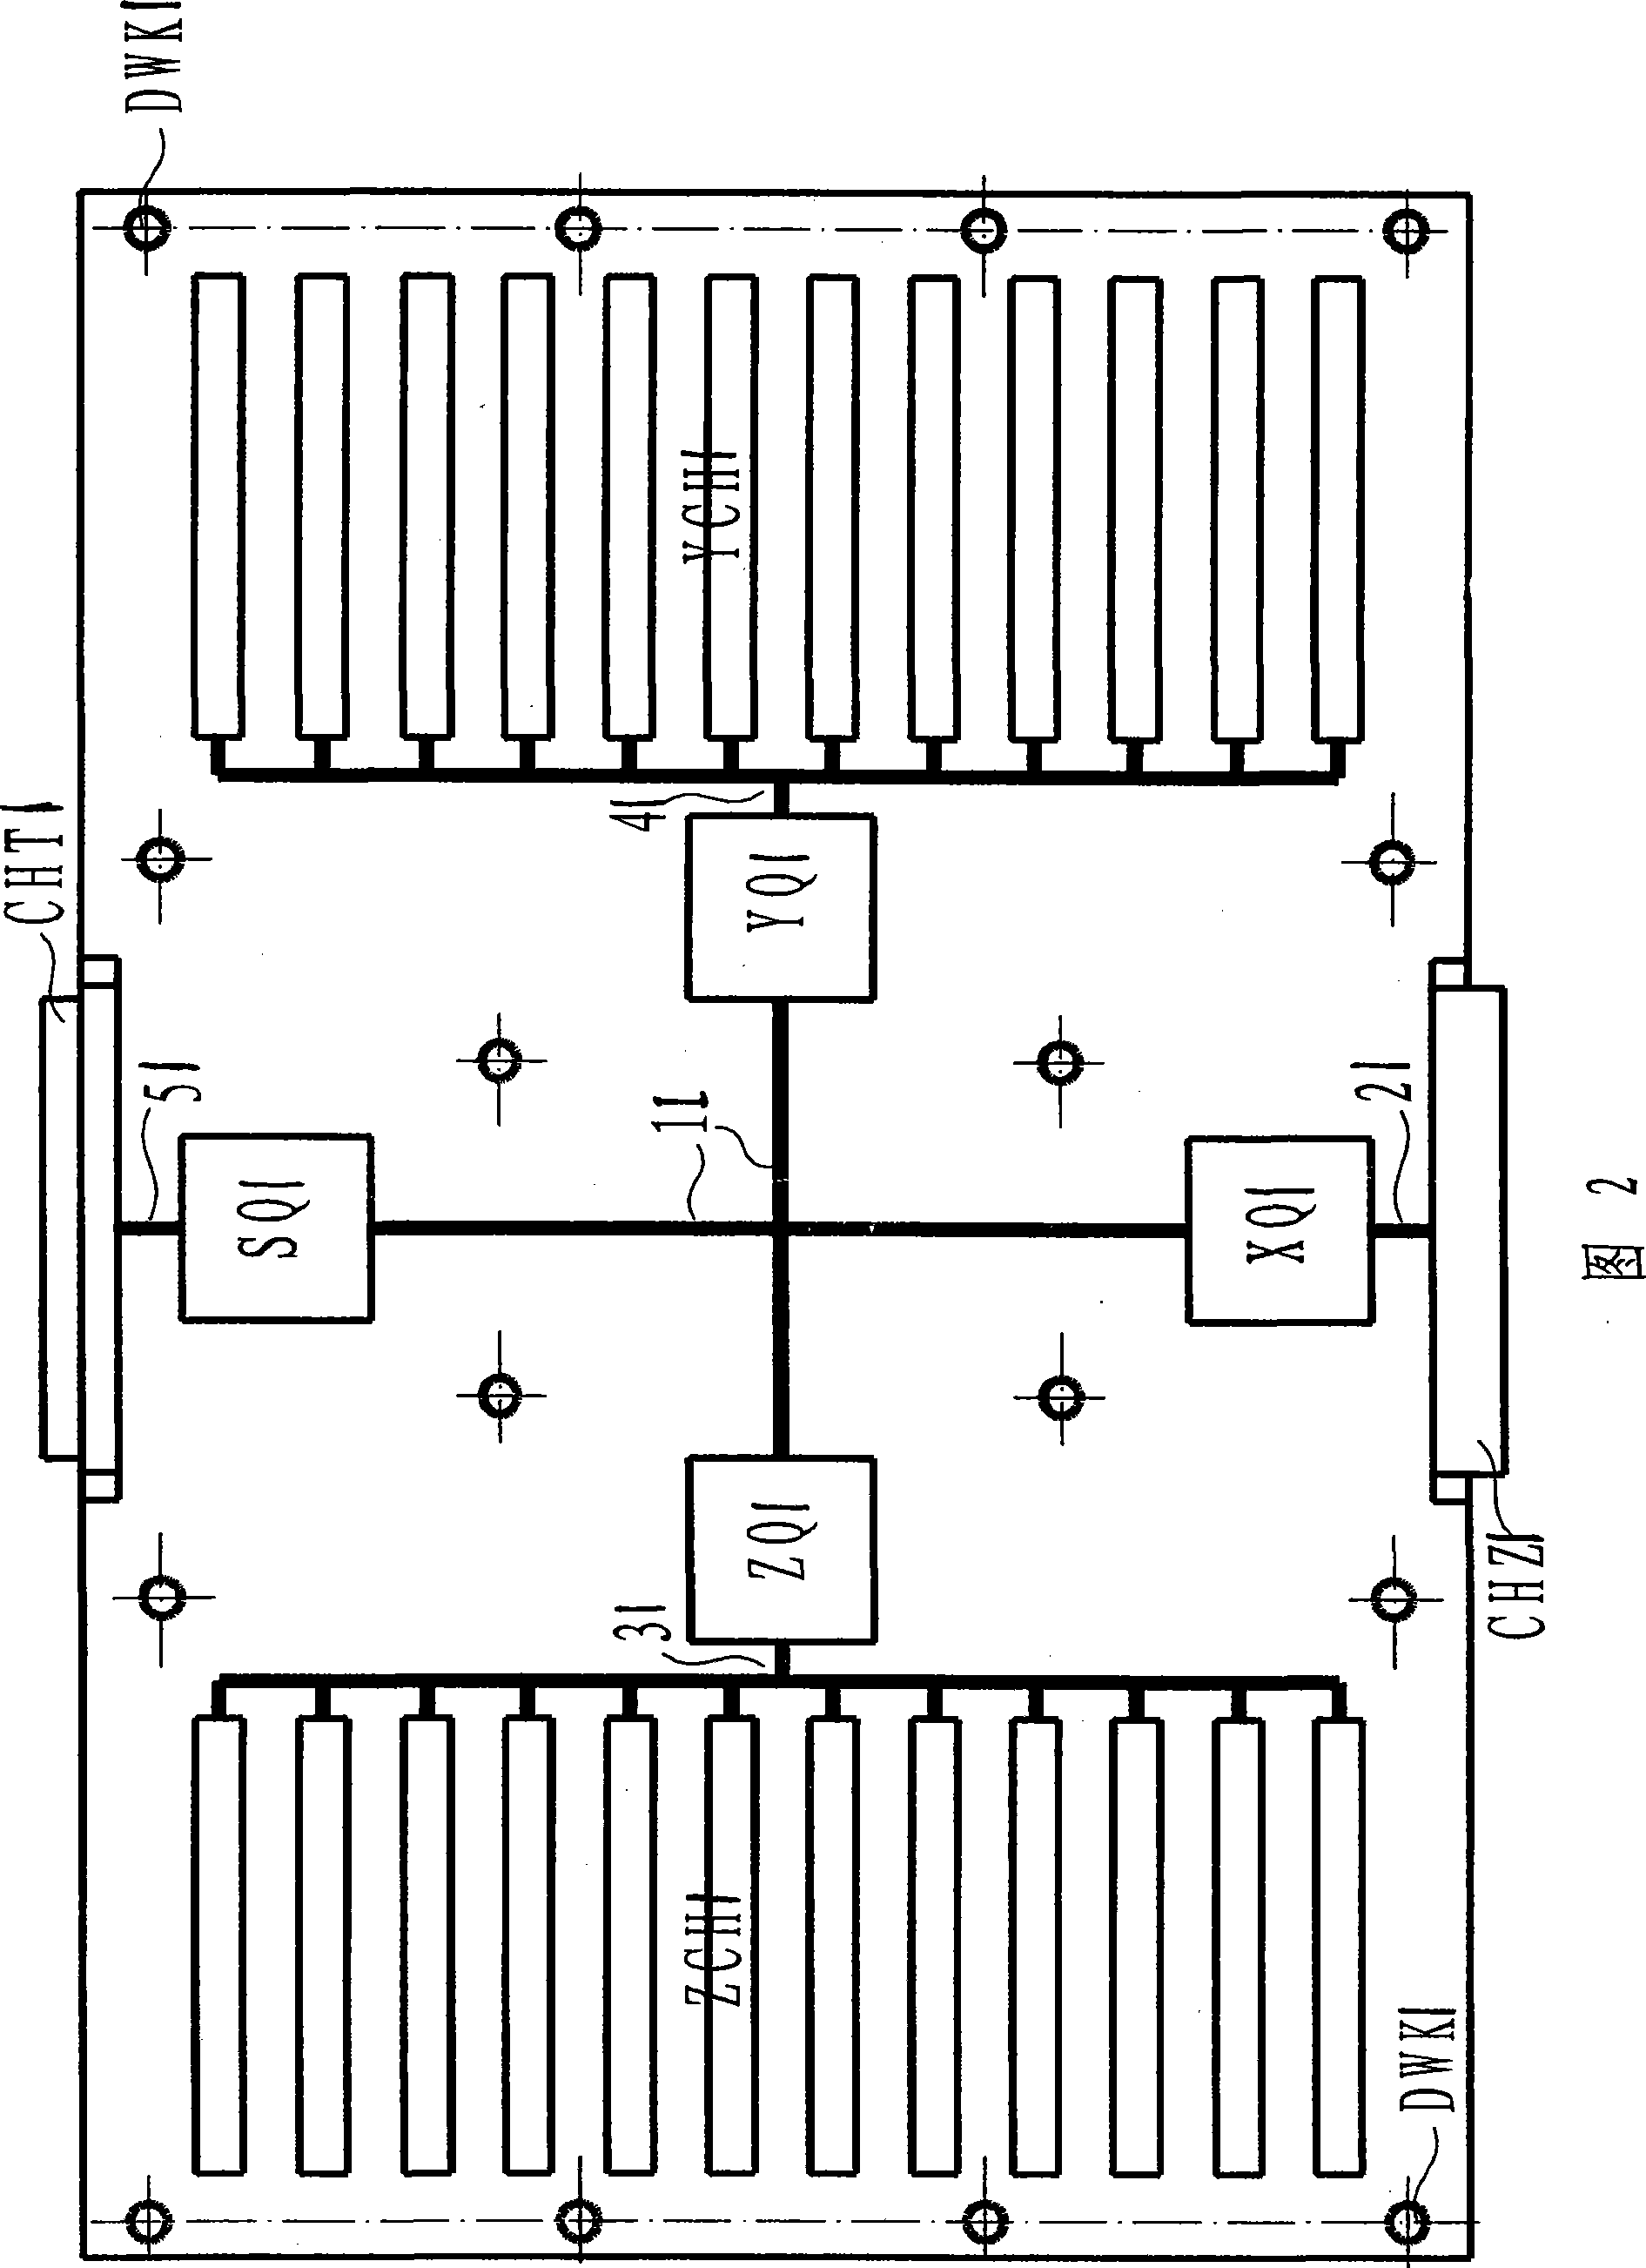 Expansion structure of bus socket and expansion method thereof